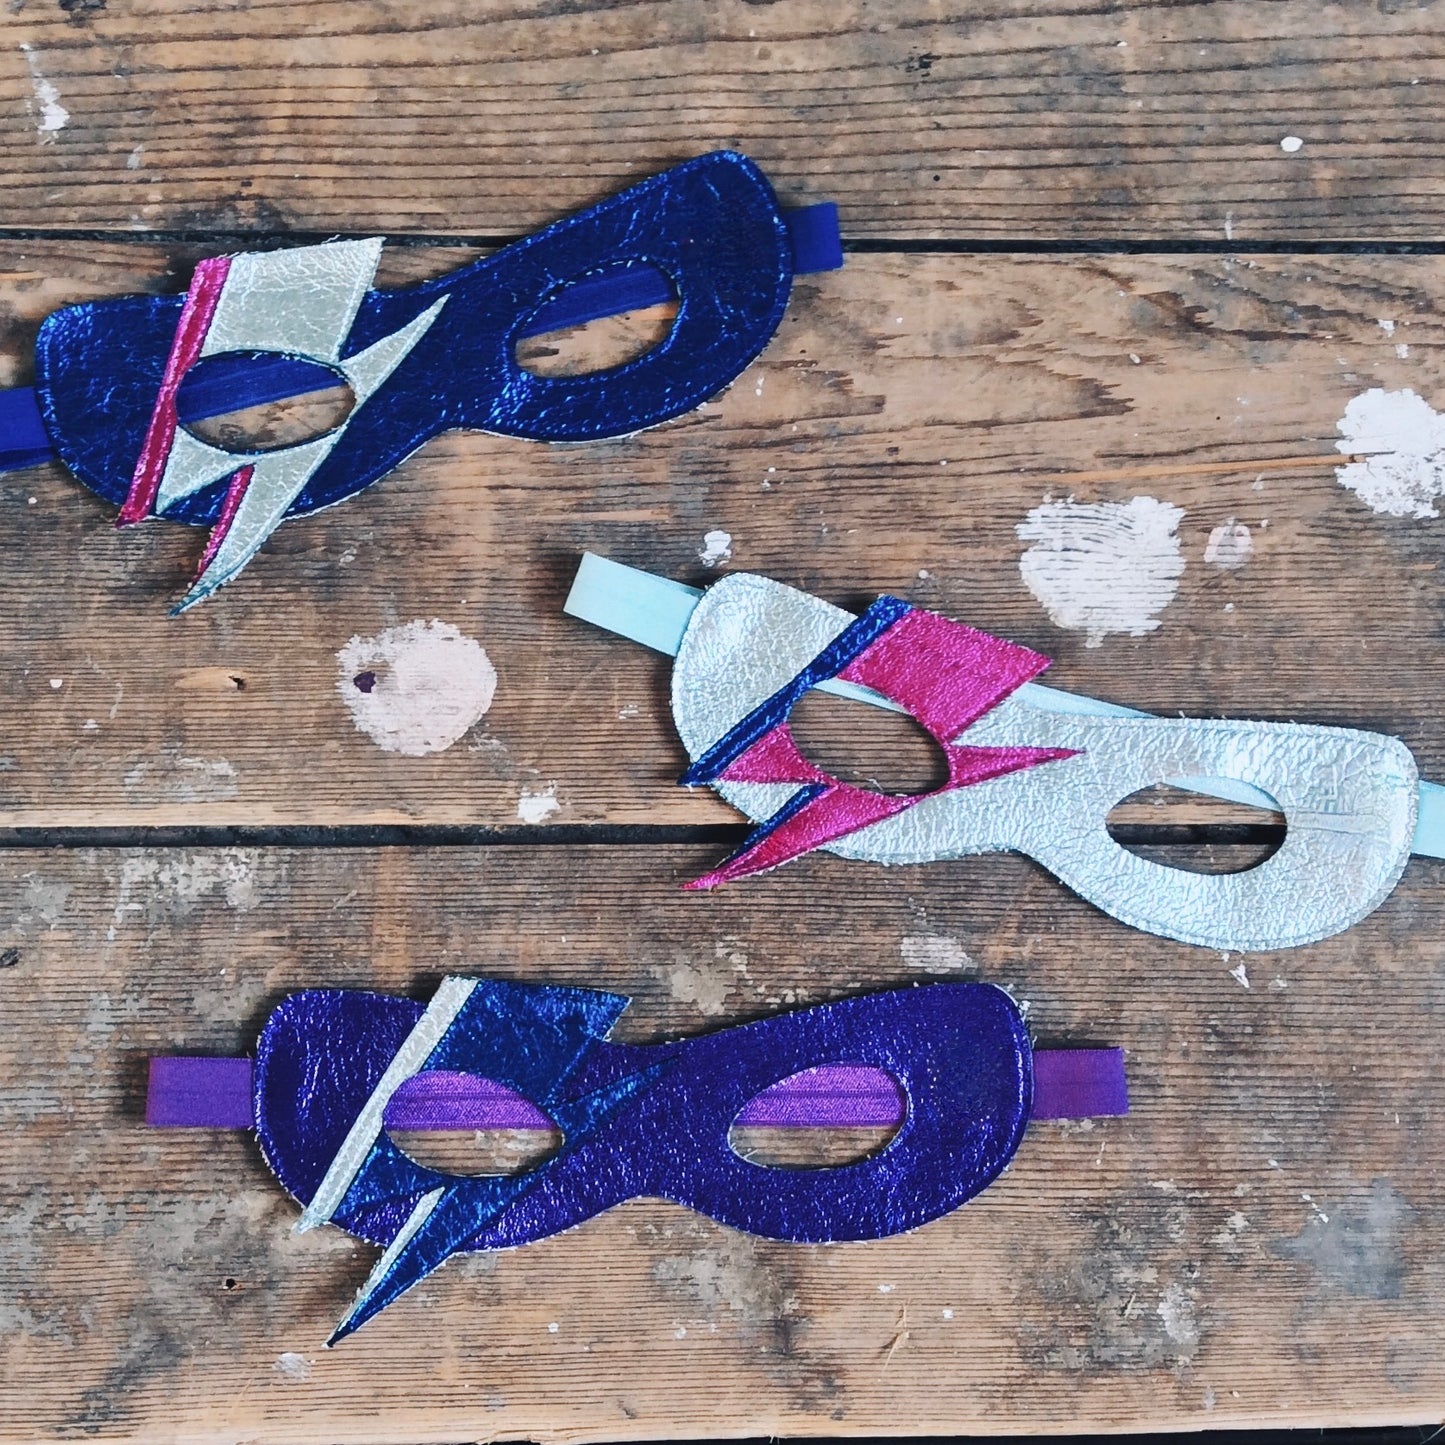 Colour variations of Metallic leather Bowie superhero mask by For Just ONE Day